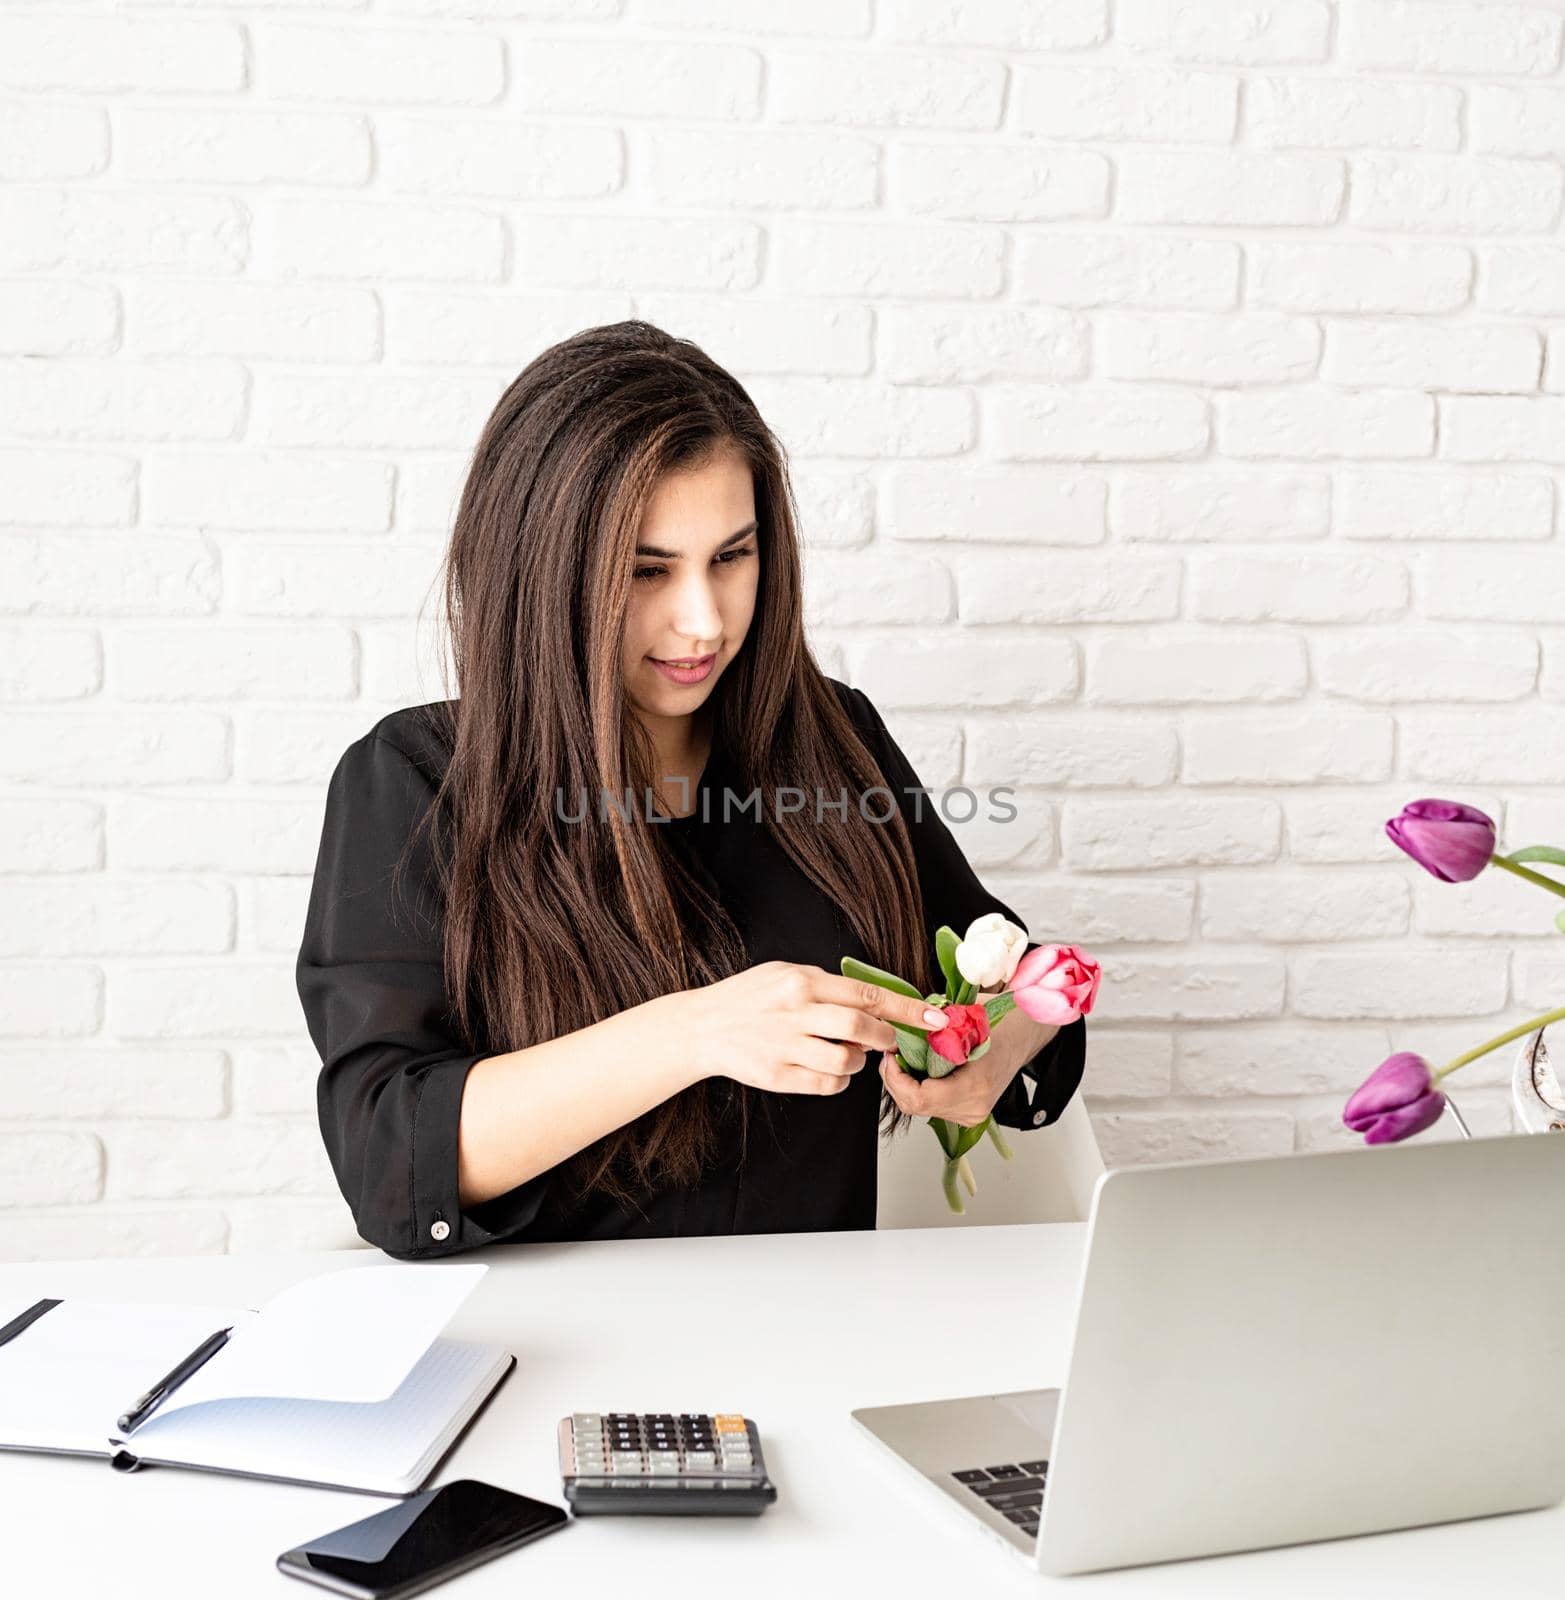 Small business concept. A young florist woman working with the client online, selecting flowers for the bouquet